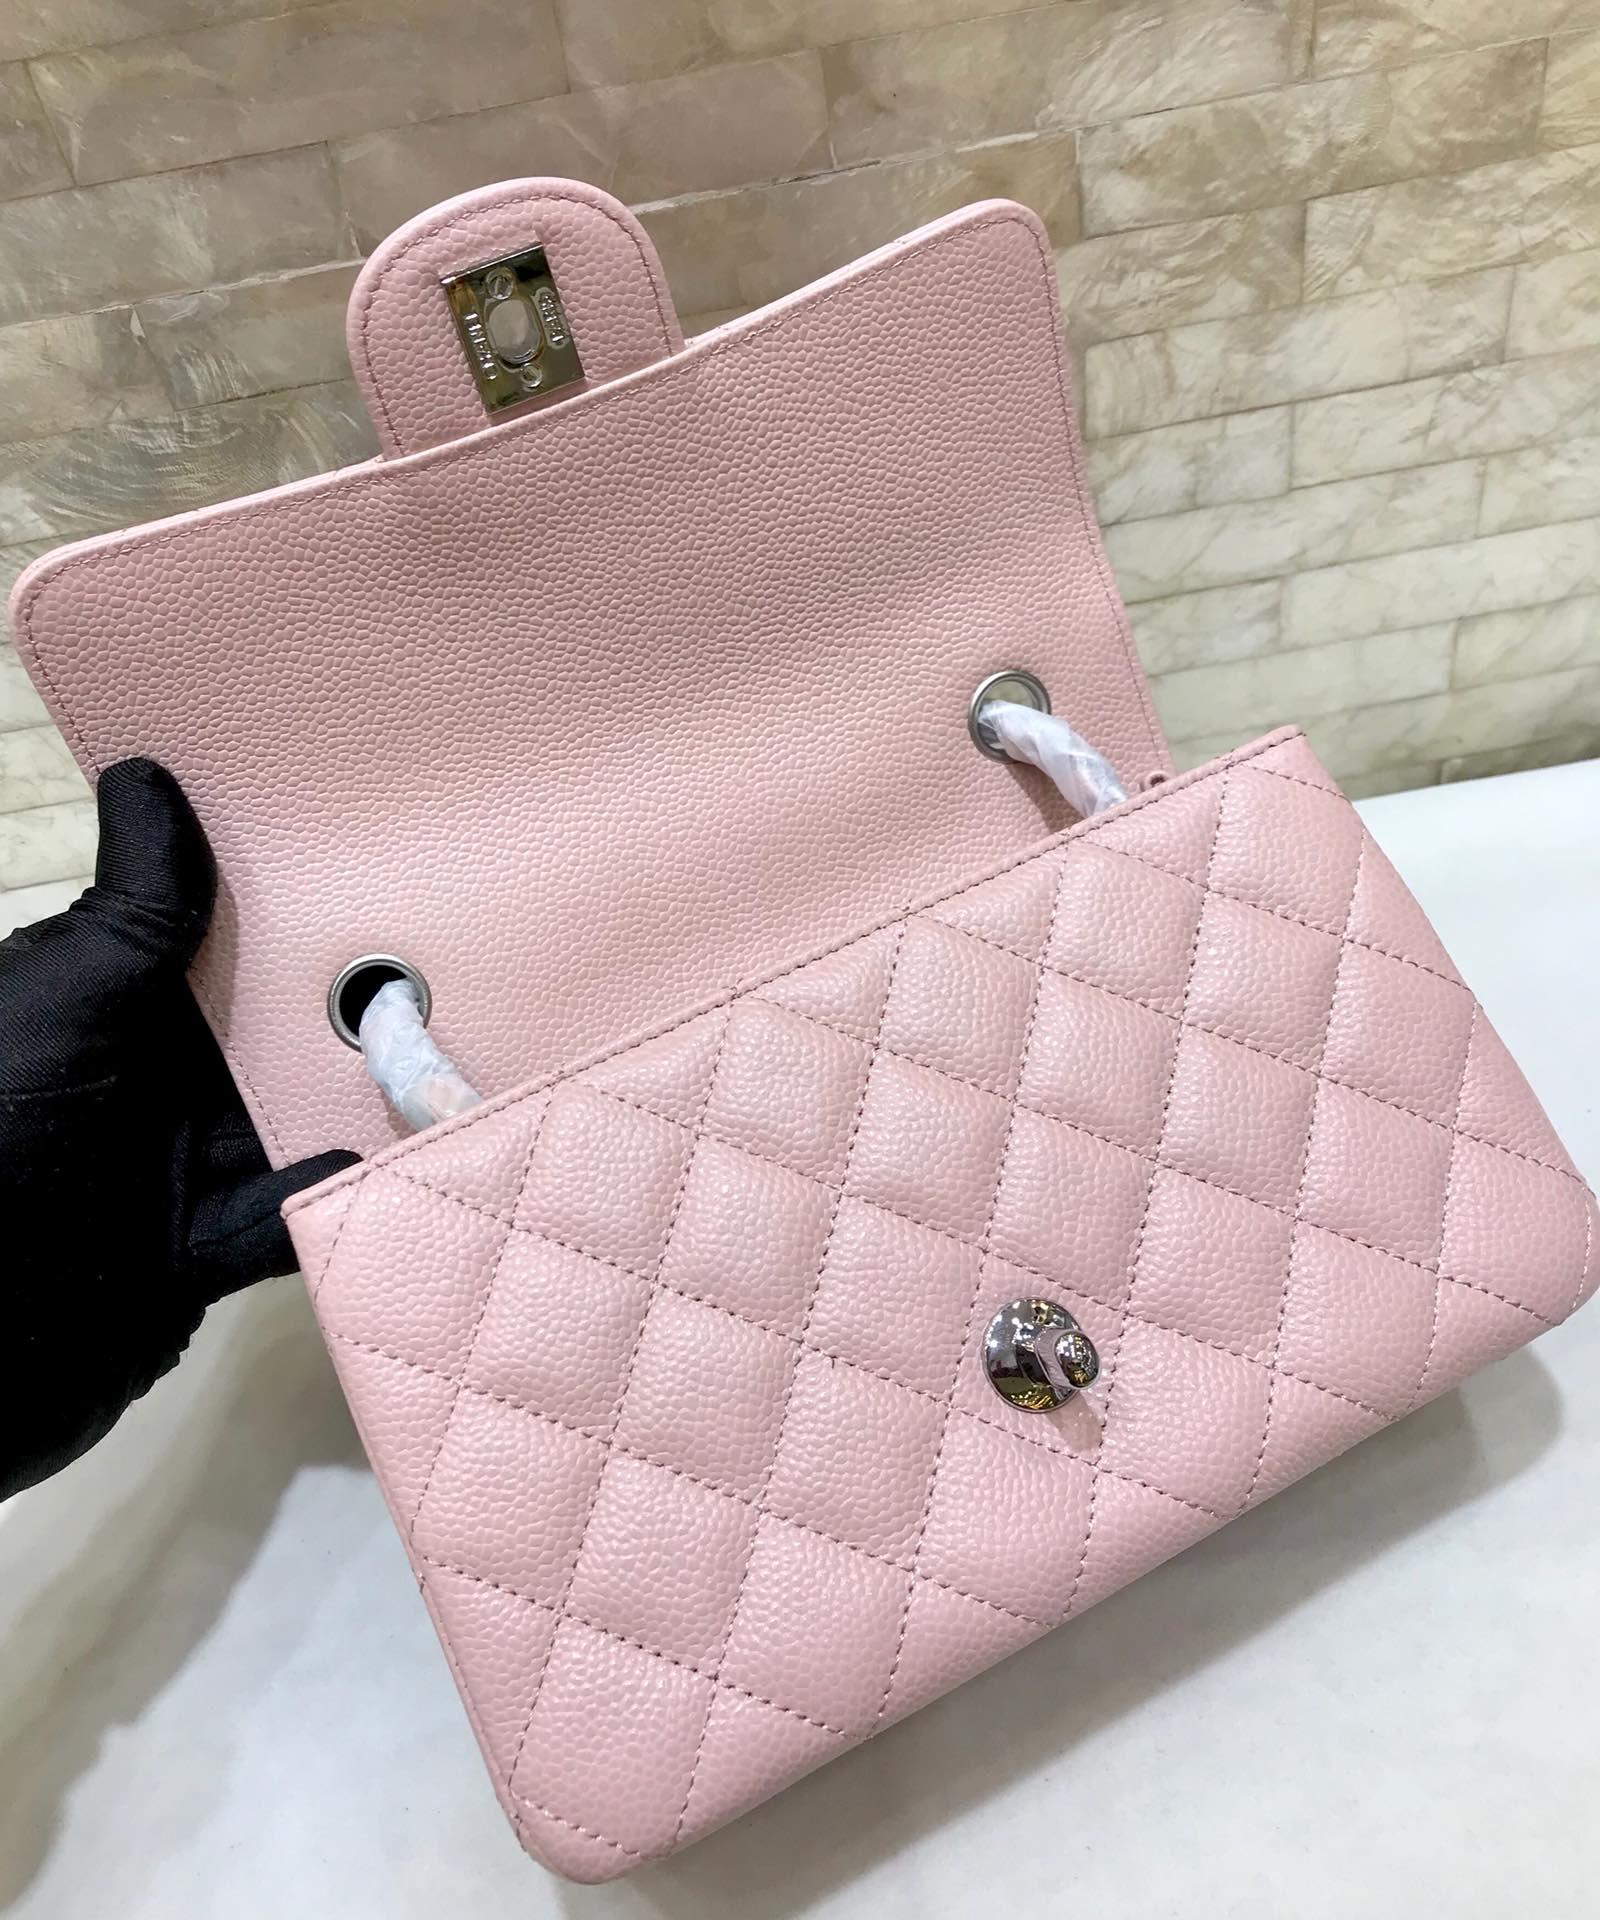 Original Copy Chanel 1112 1115 1117 Classics CF Flap Bag Caviar Quilted Genuine Leather Pink Silver Hardware